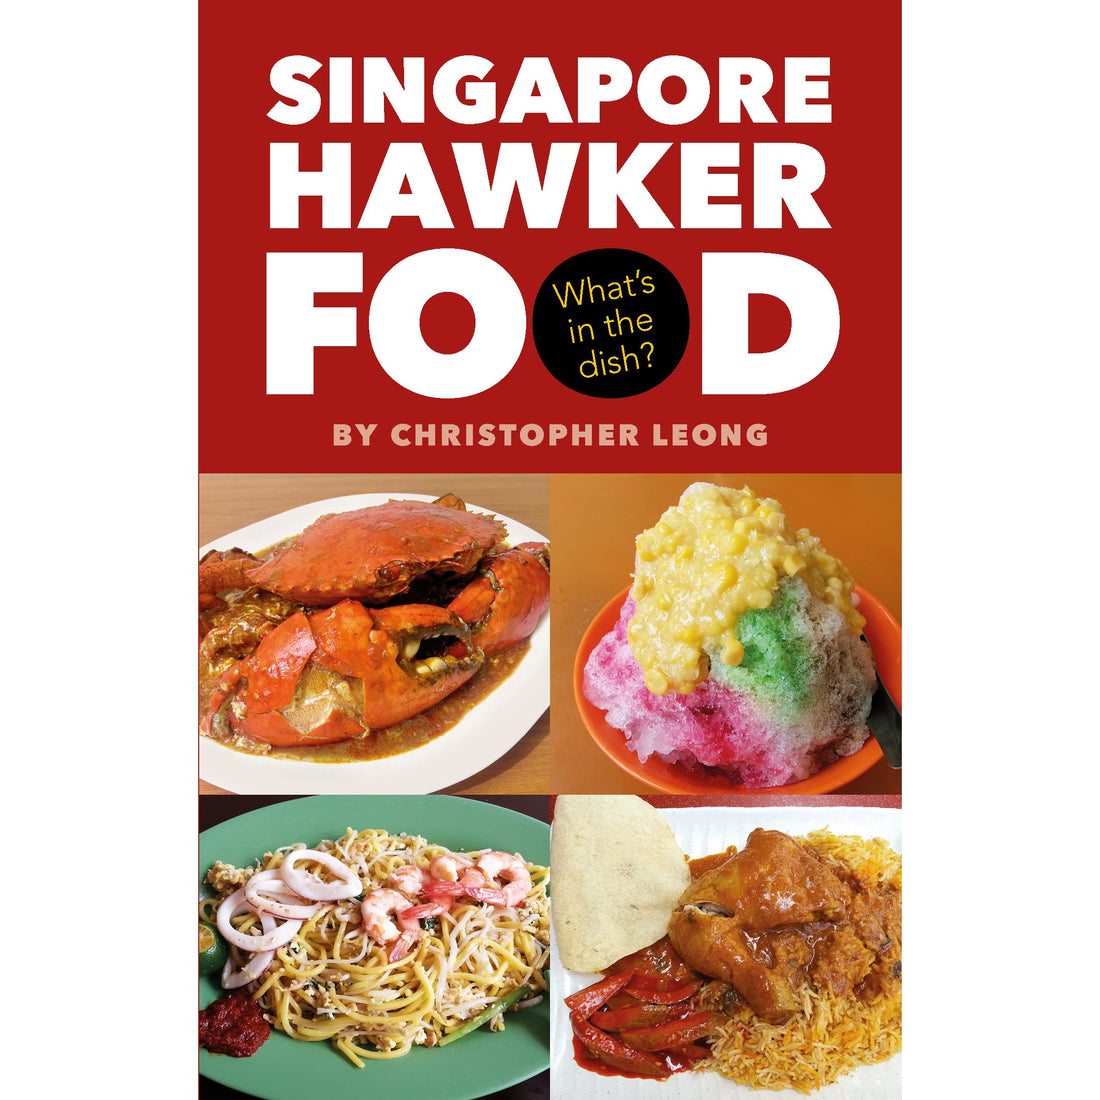 Singapore Hawker Food: What's in the dish?